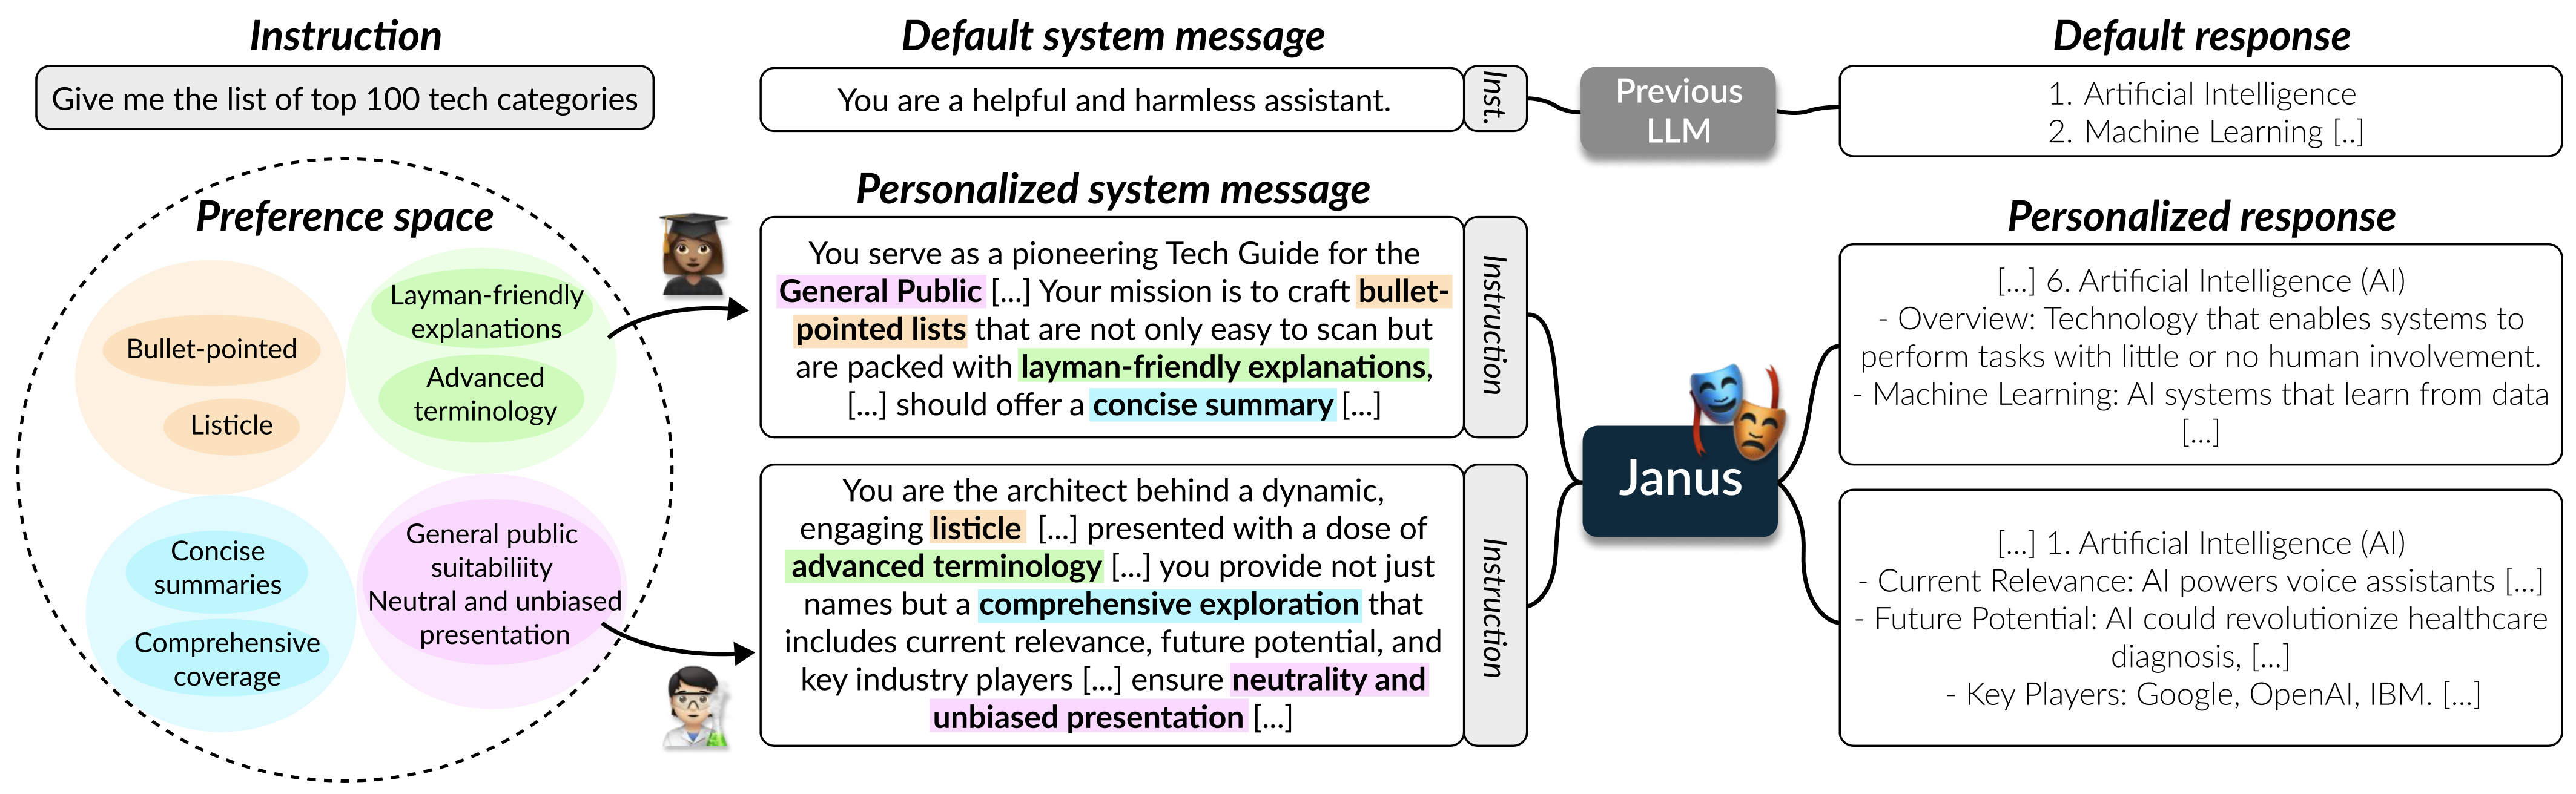 janus_overview.png